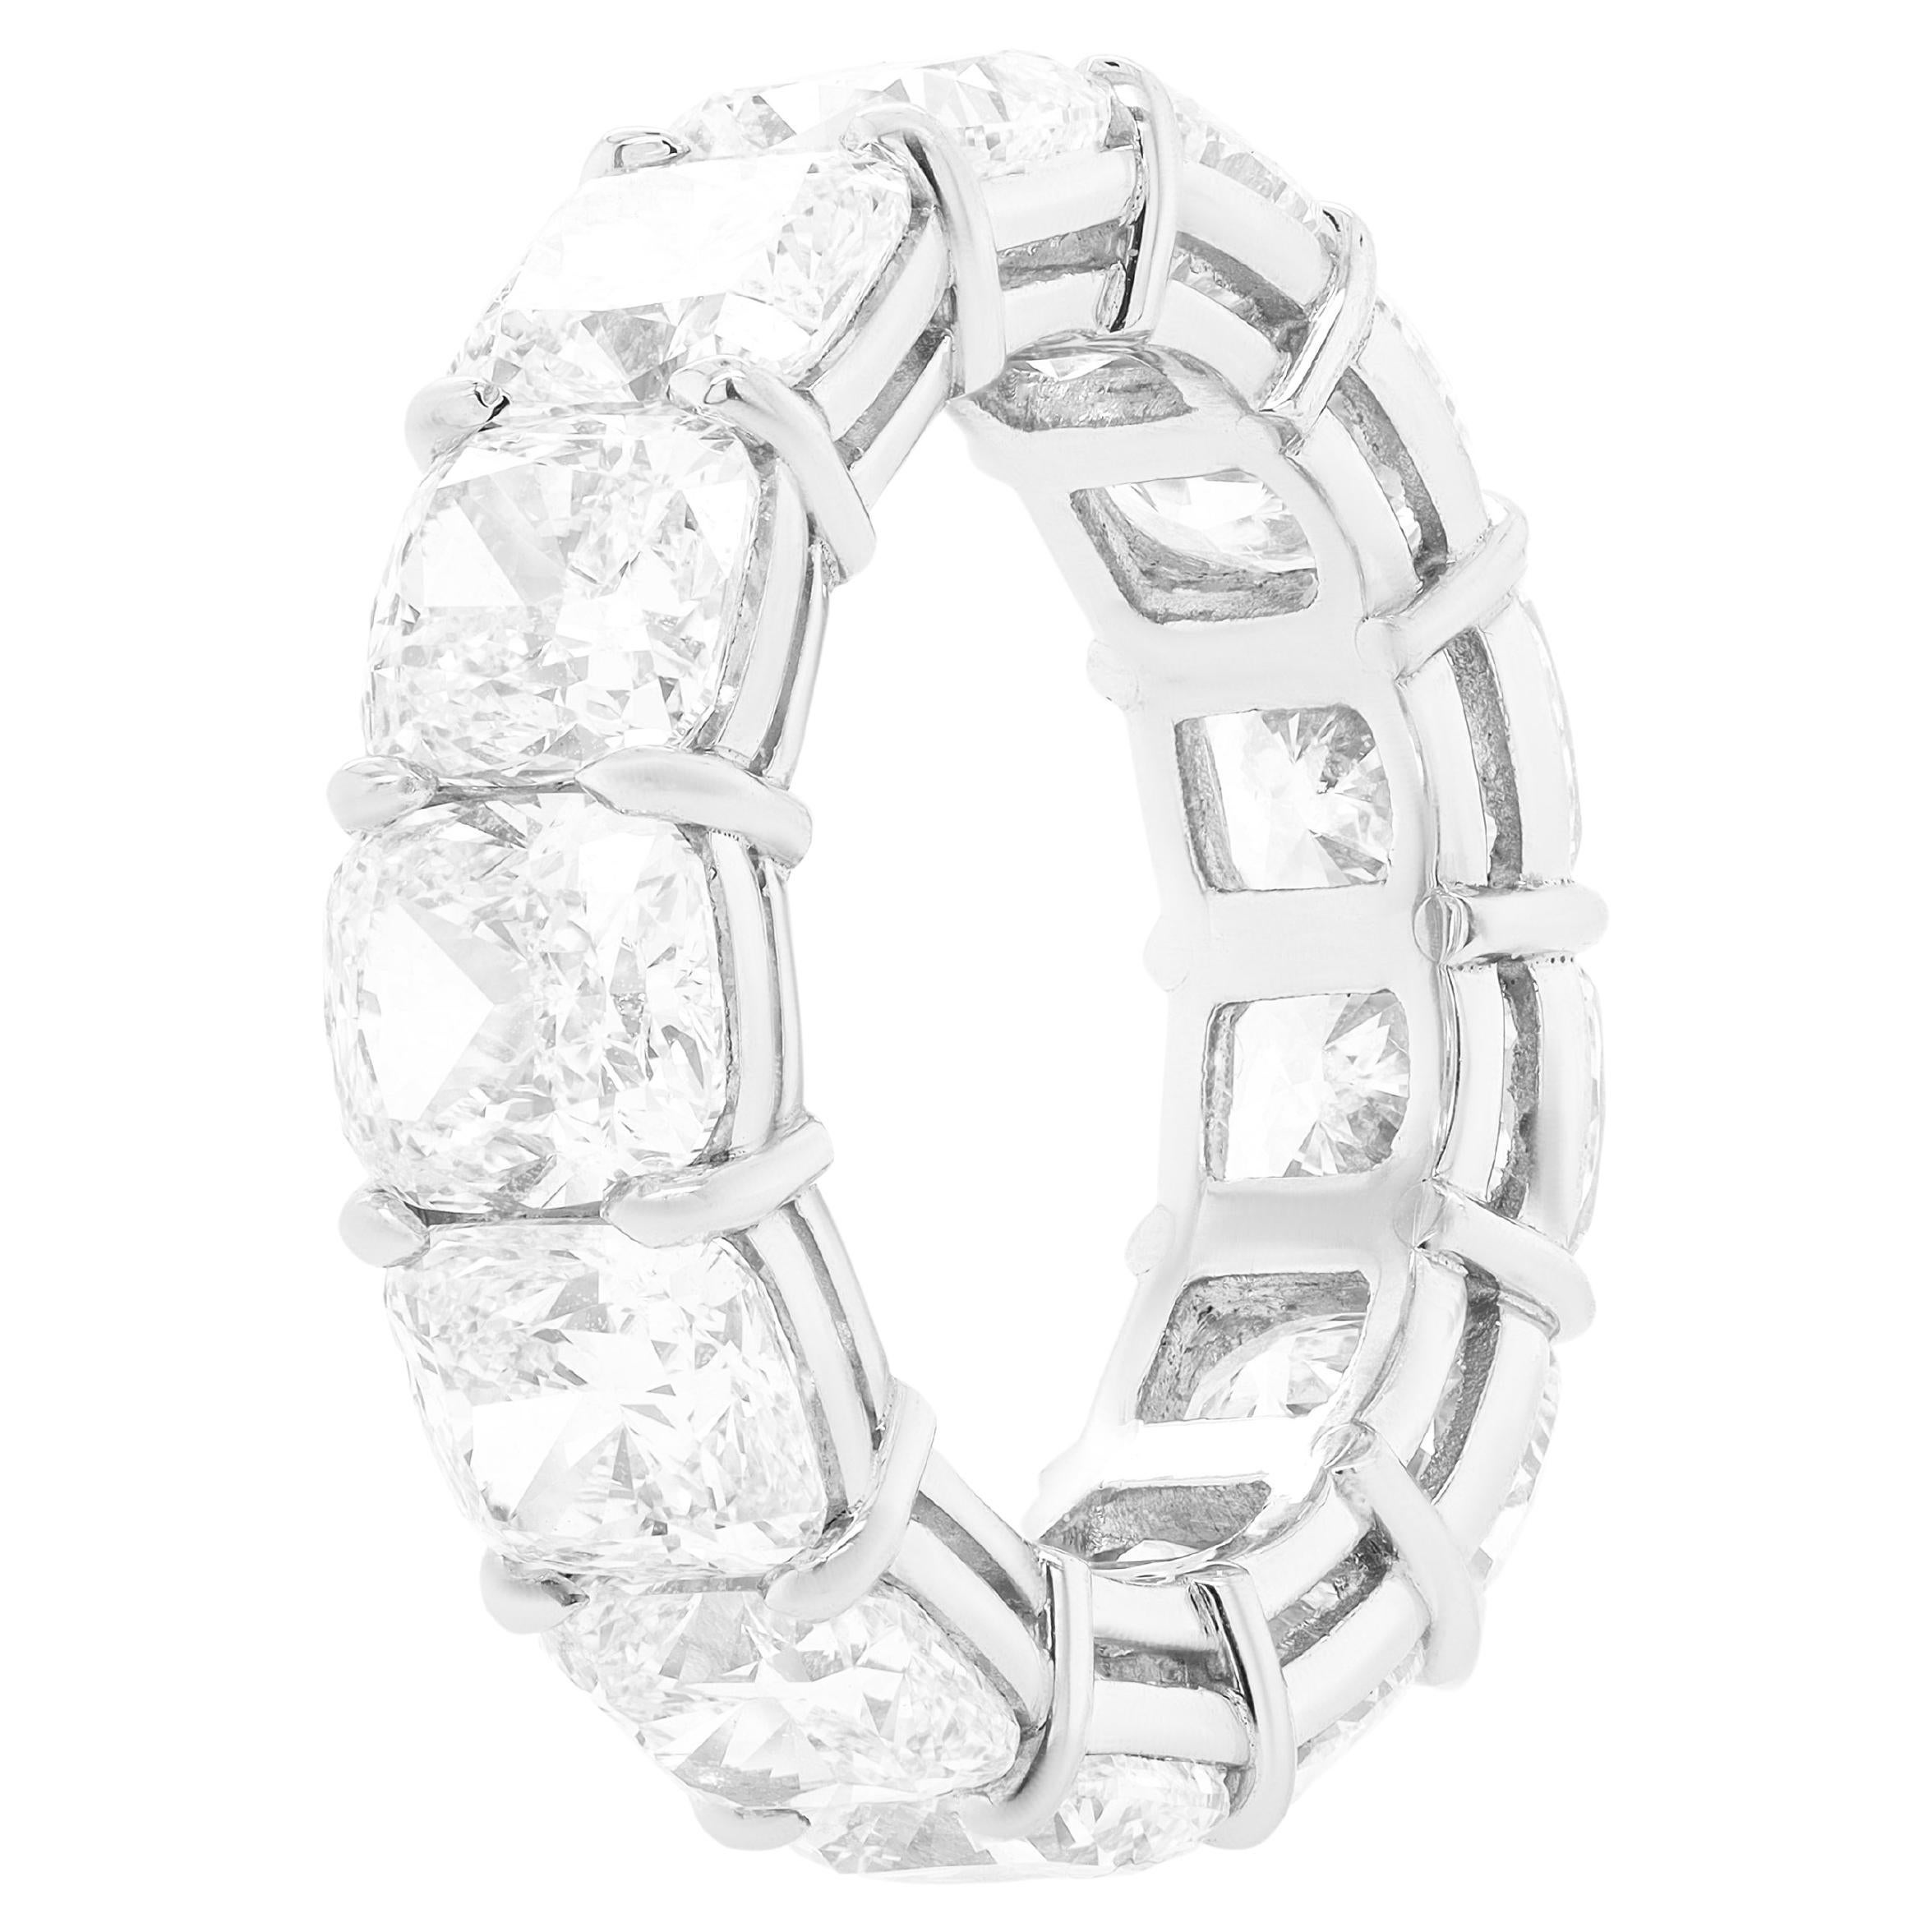 Diana M. Platinum eternity band features 13.12 cts OF cushion cut diamonds FG 